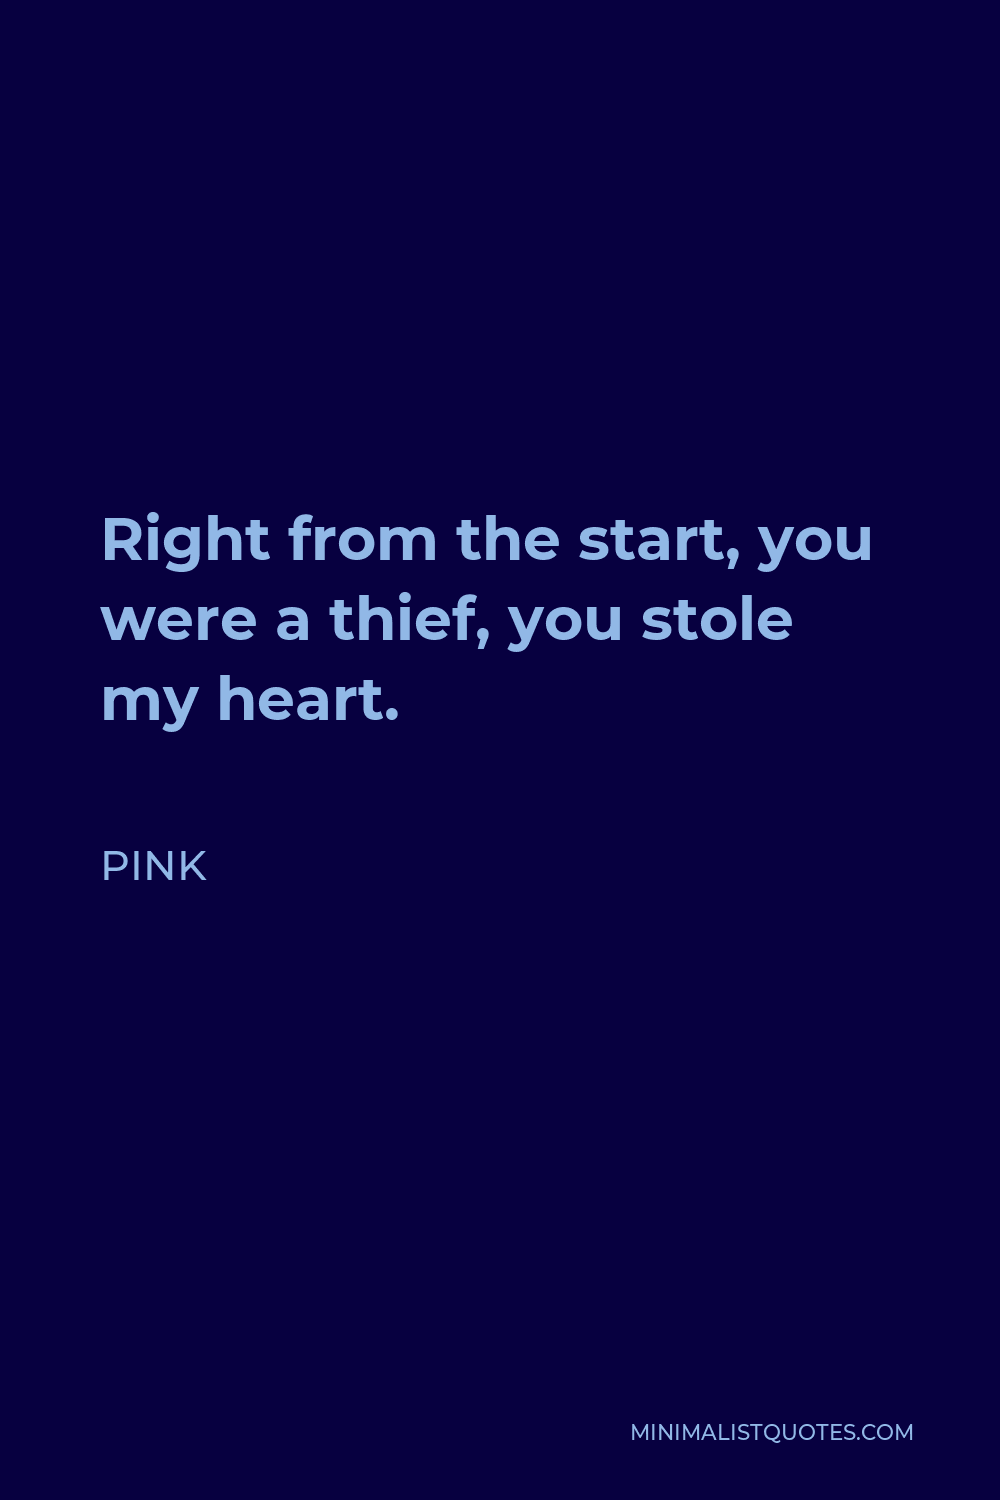 Pink Quote - Right from the start, you were a thief, you stole my heart.